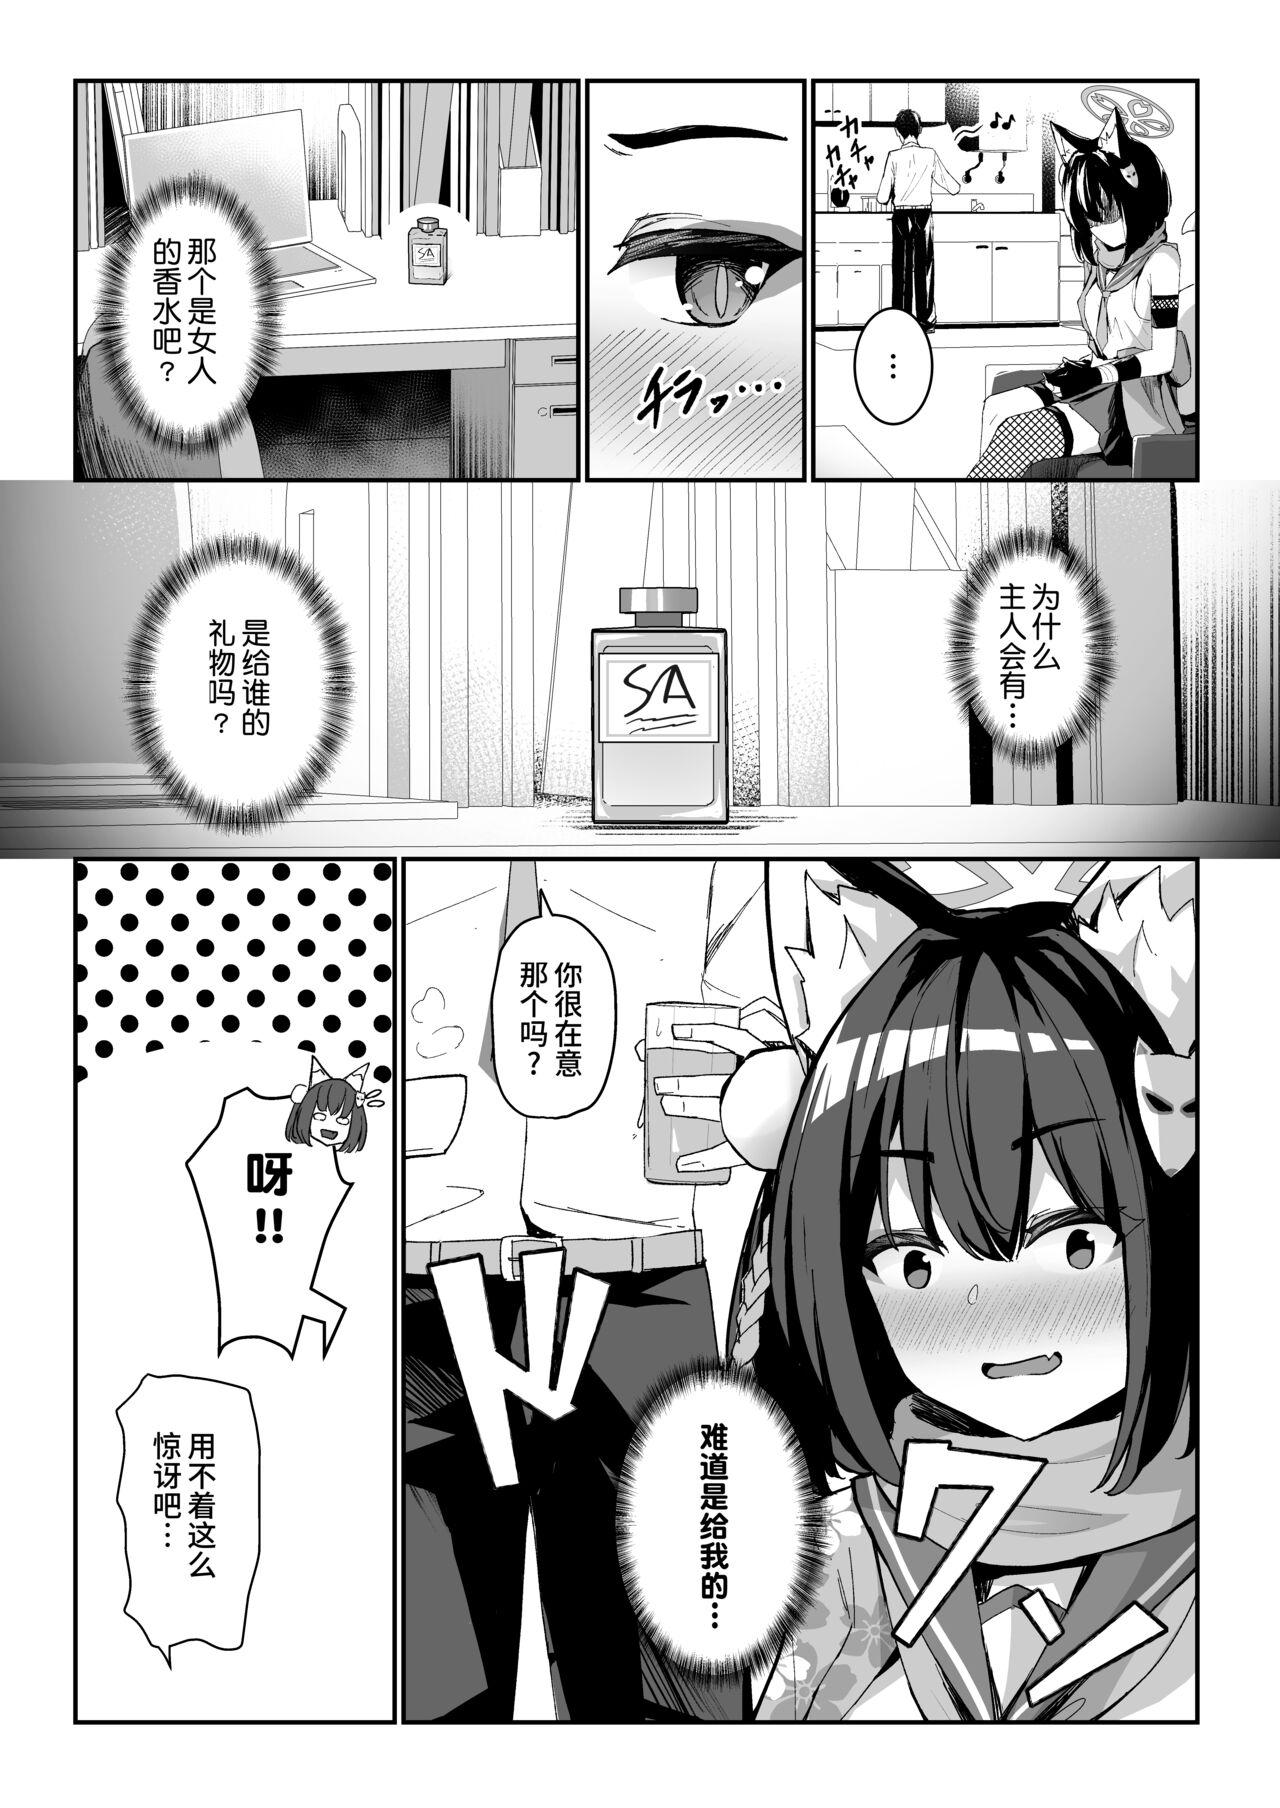 Branquinha 純情発情イズナちゃん - Blue archive Real Couple - Page 4